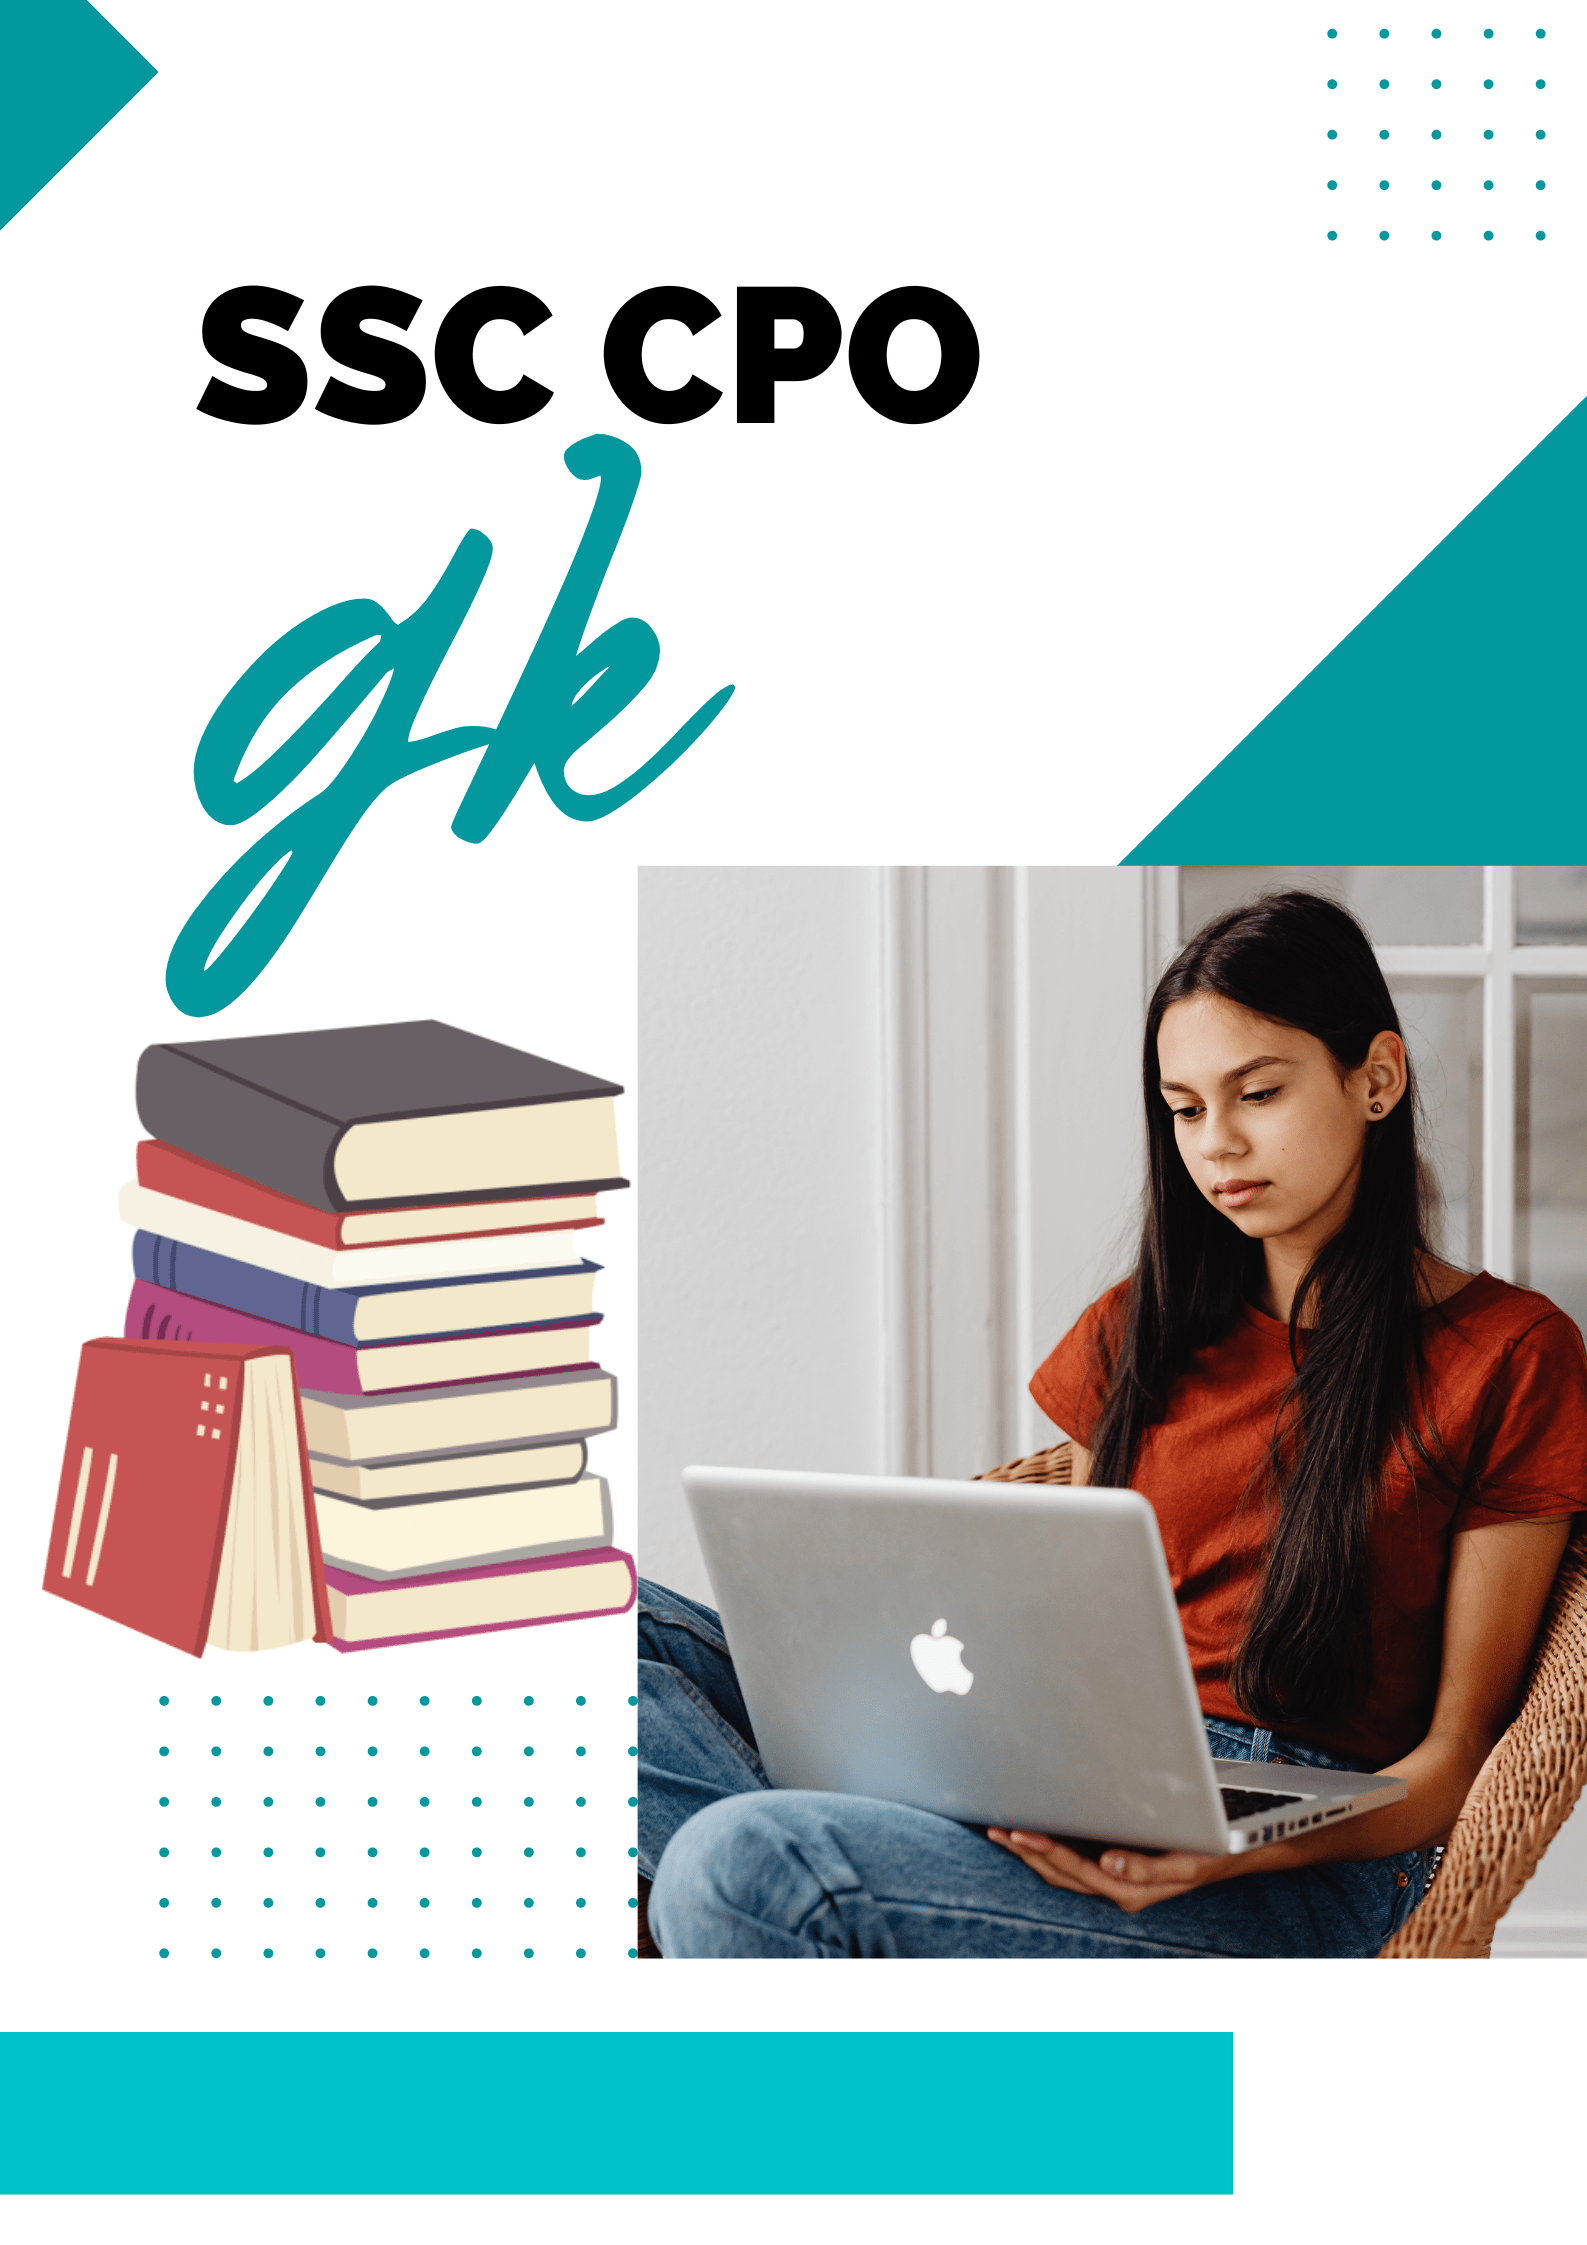 ssc cpo gk questions